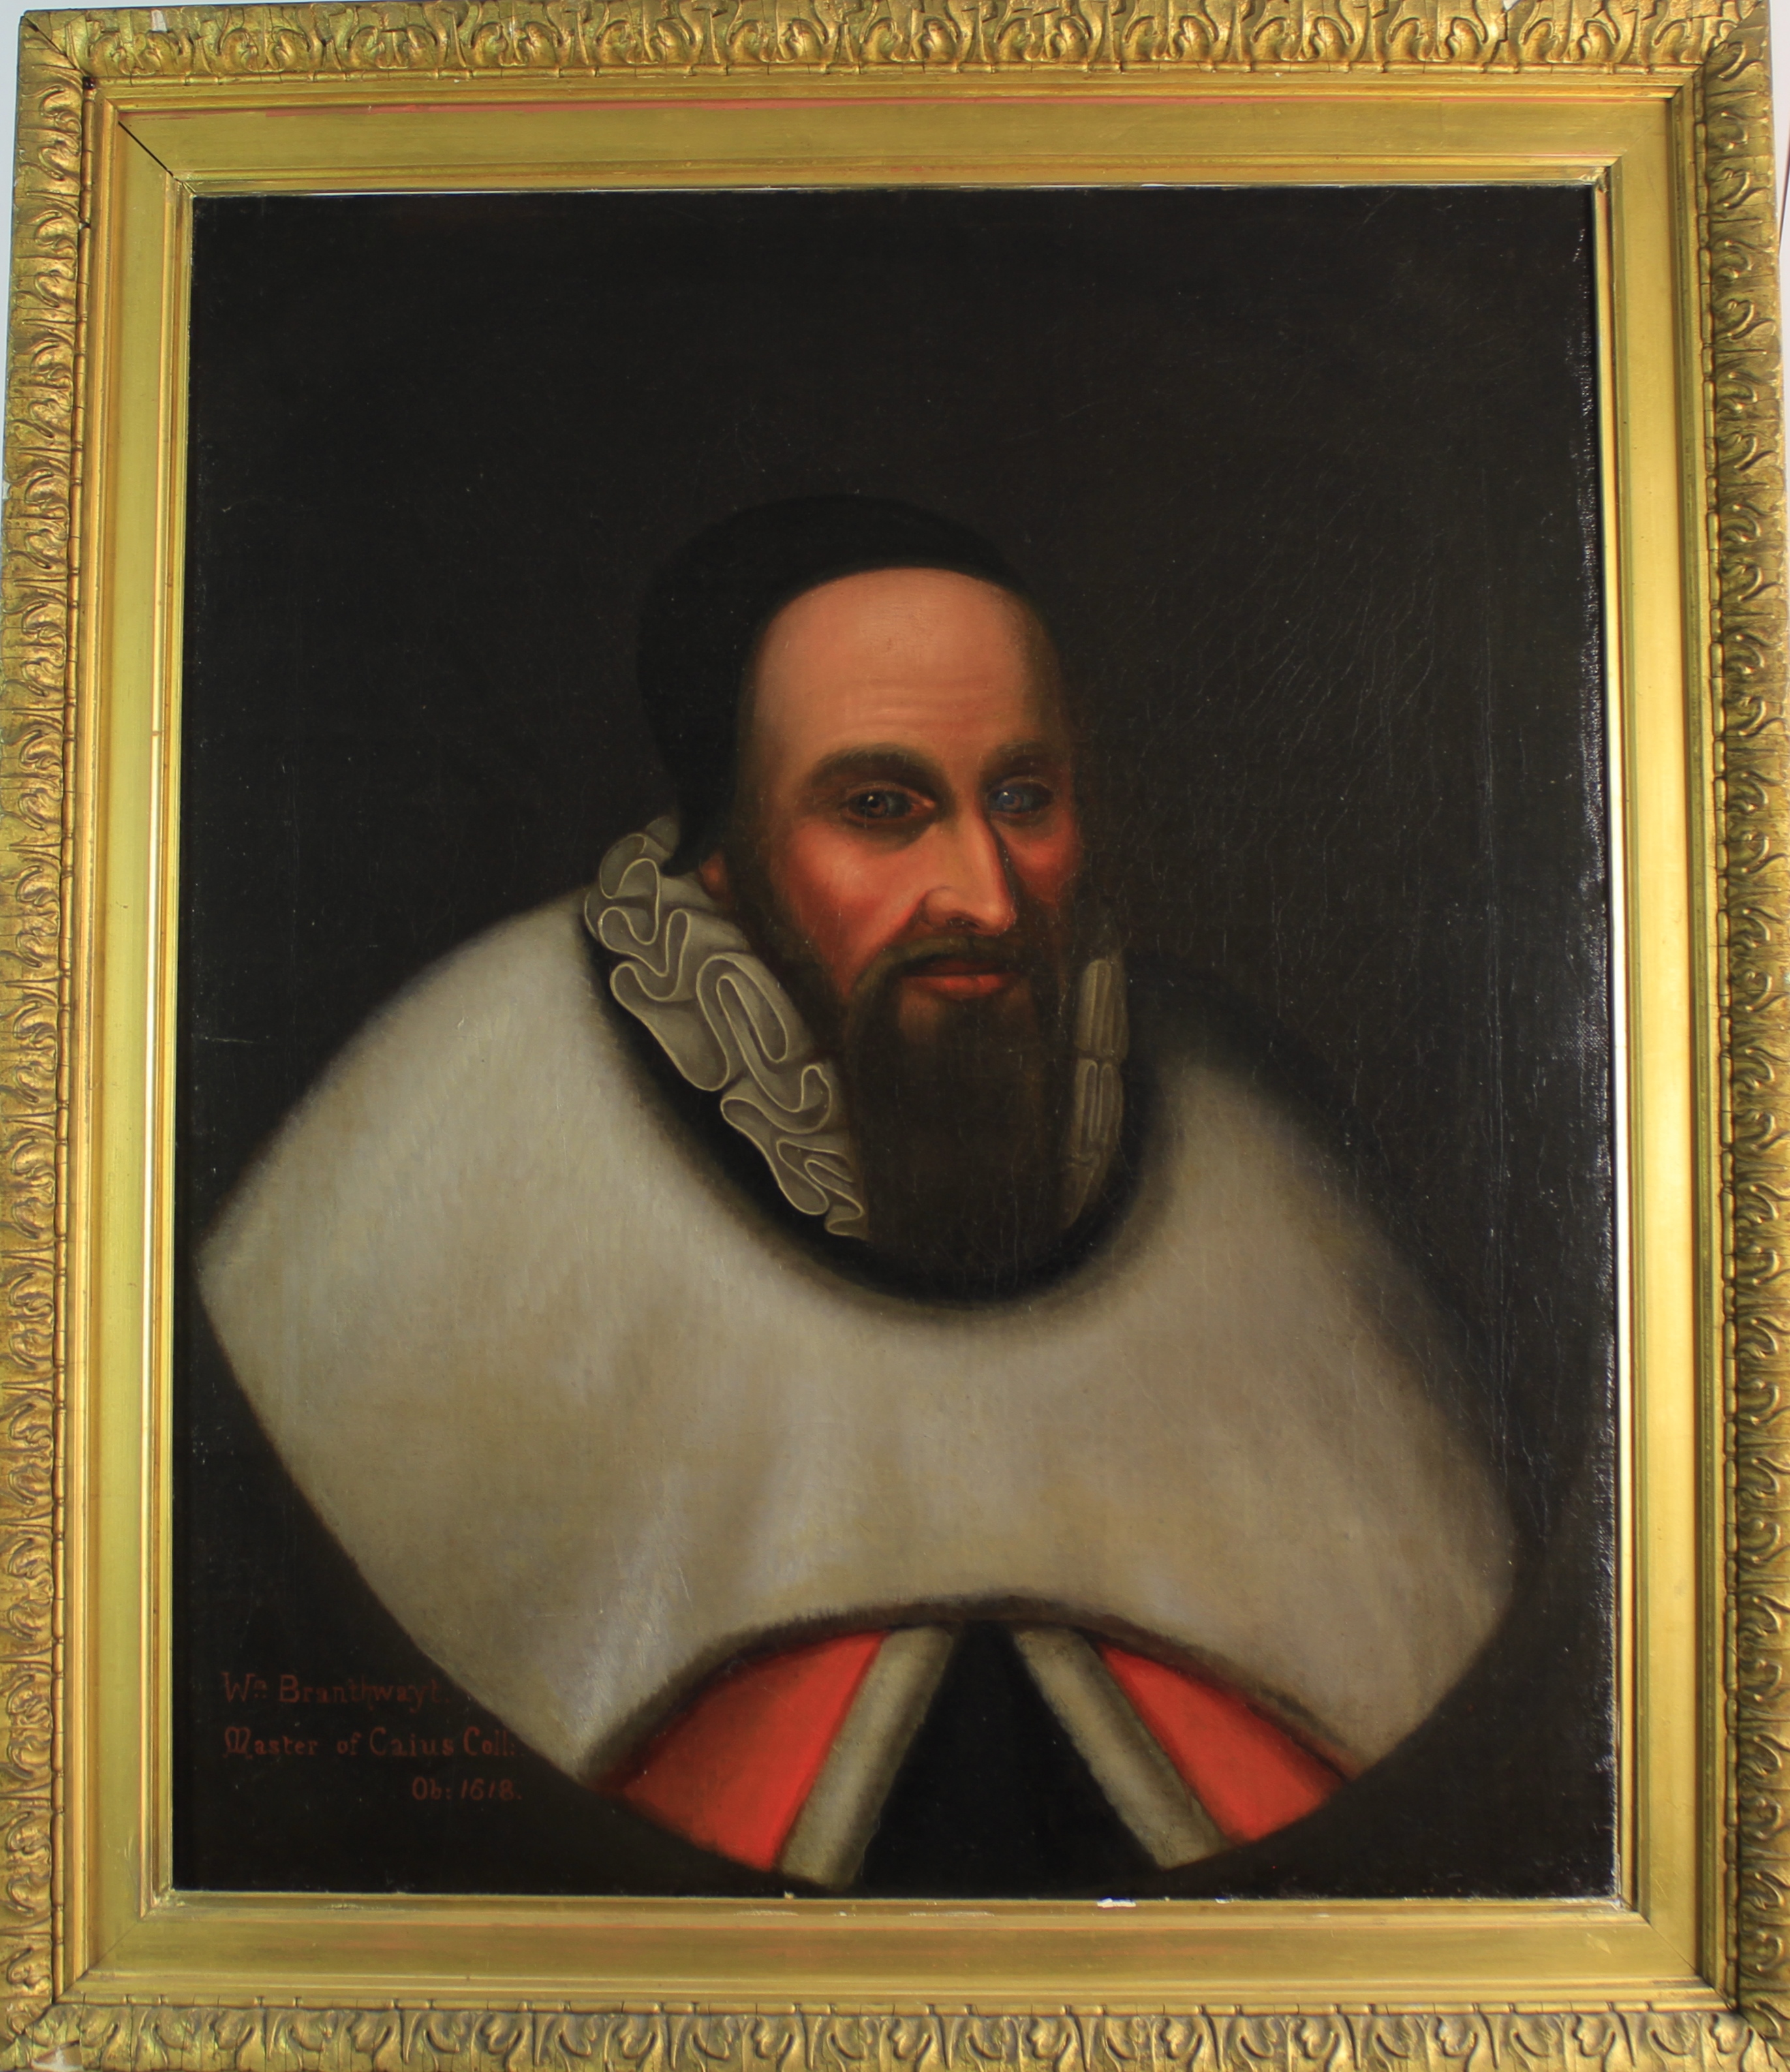 Late 16th/early 17th Century English School, Portrait of "Wm Branthwayt, Master of Caius Coll,, Ob: